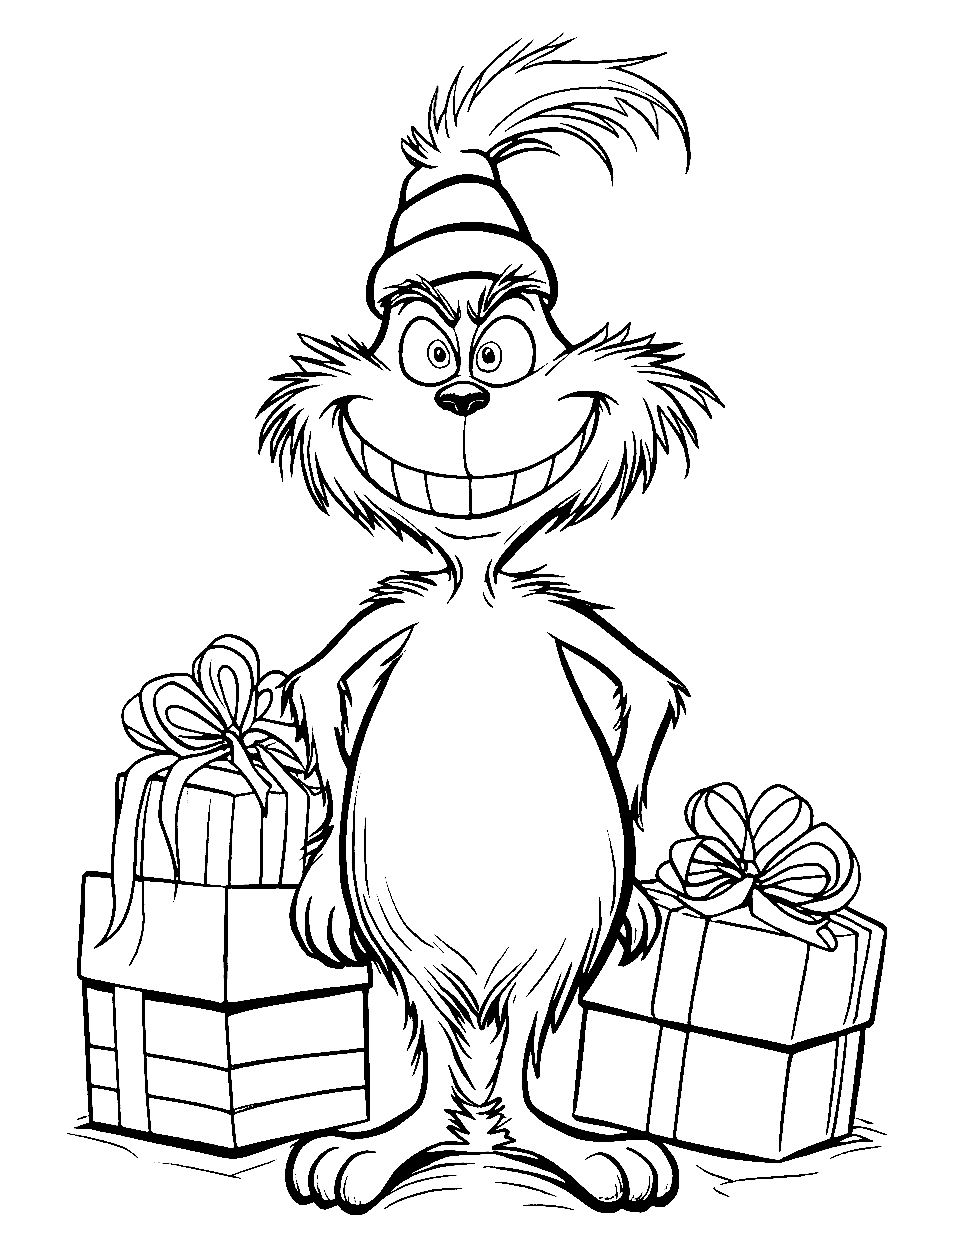 35 Grinch Coloring Pages: Free Printable Sheets